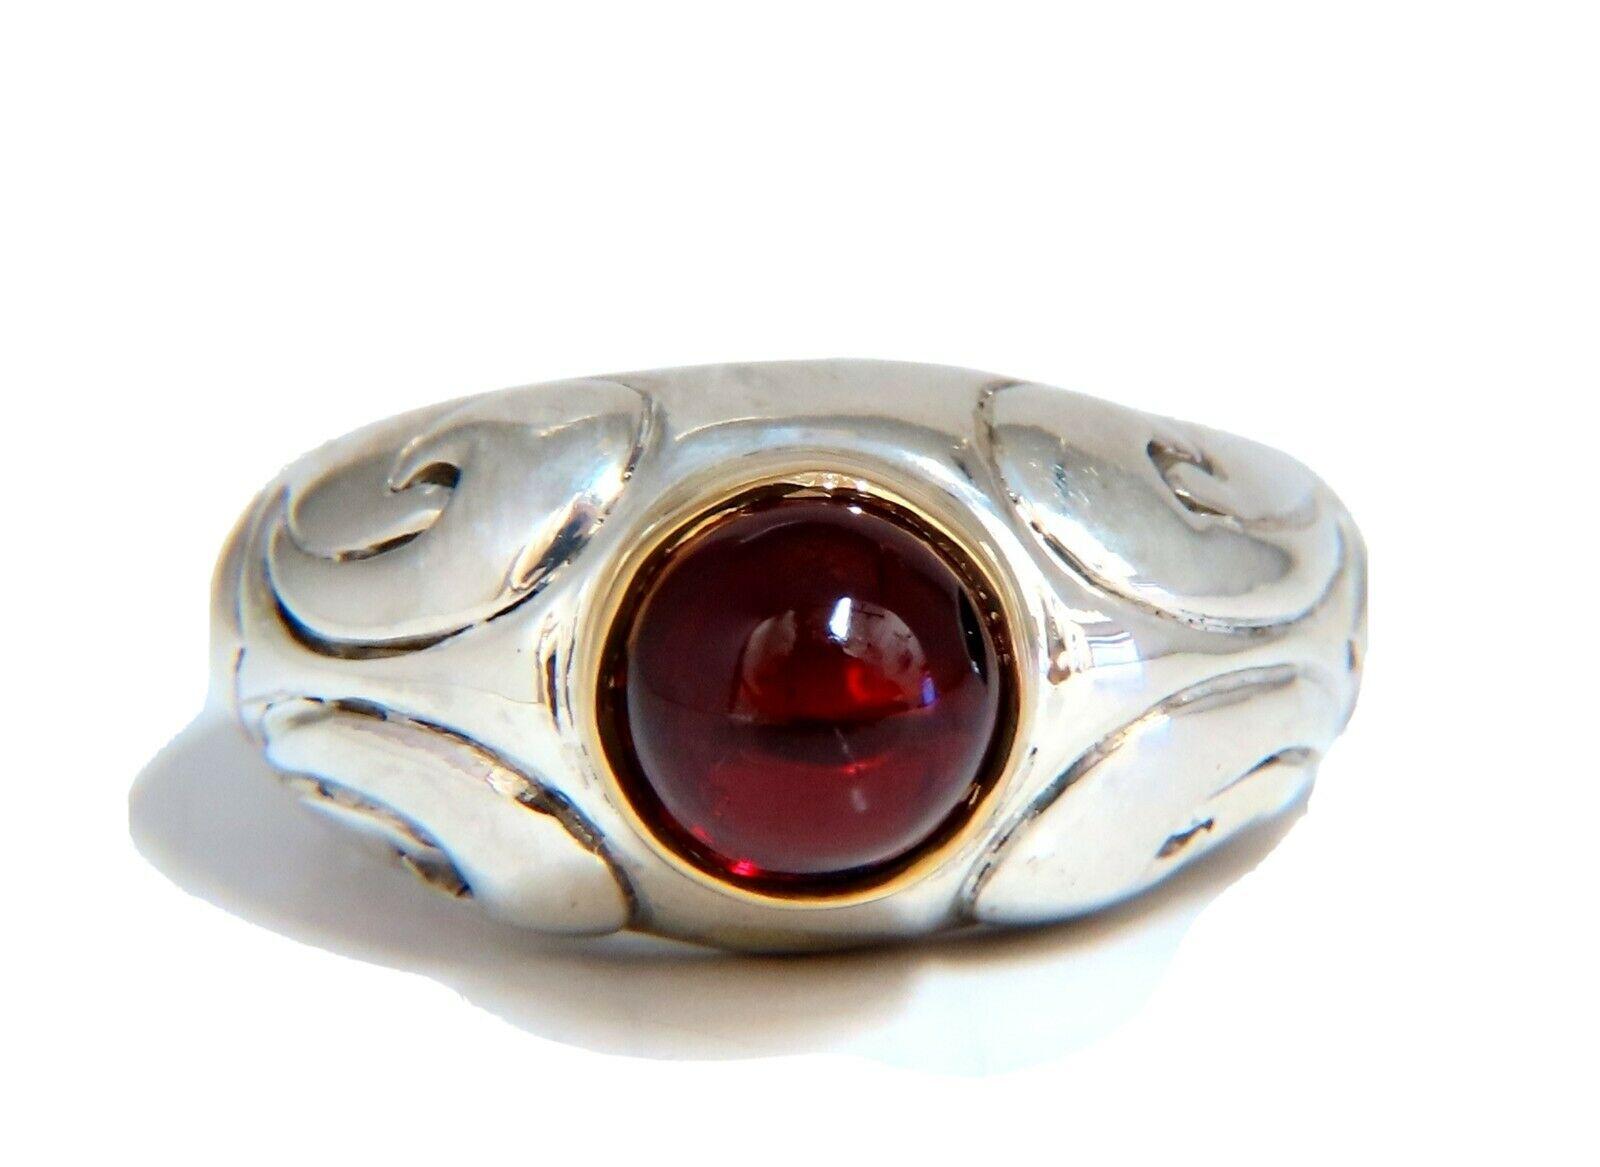 2 carat natural cabochon crimson red garnet ring

Garnet measures 6.7 mm diameter

Clean clarity and transparent


Total weight 8.1 g

Depth of ring 10.5 mm

Ring is 11 mm wide

Size 6 and 1/2 and we may resize